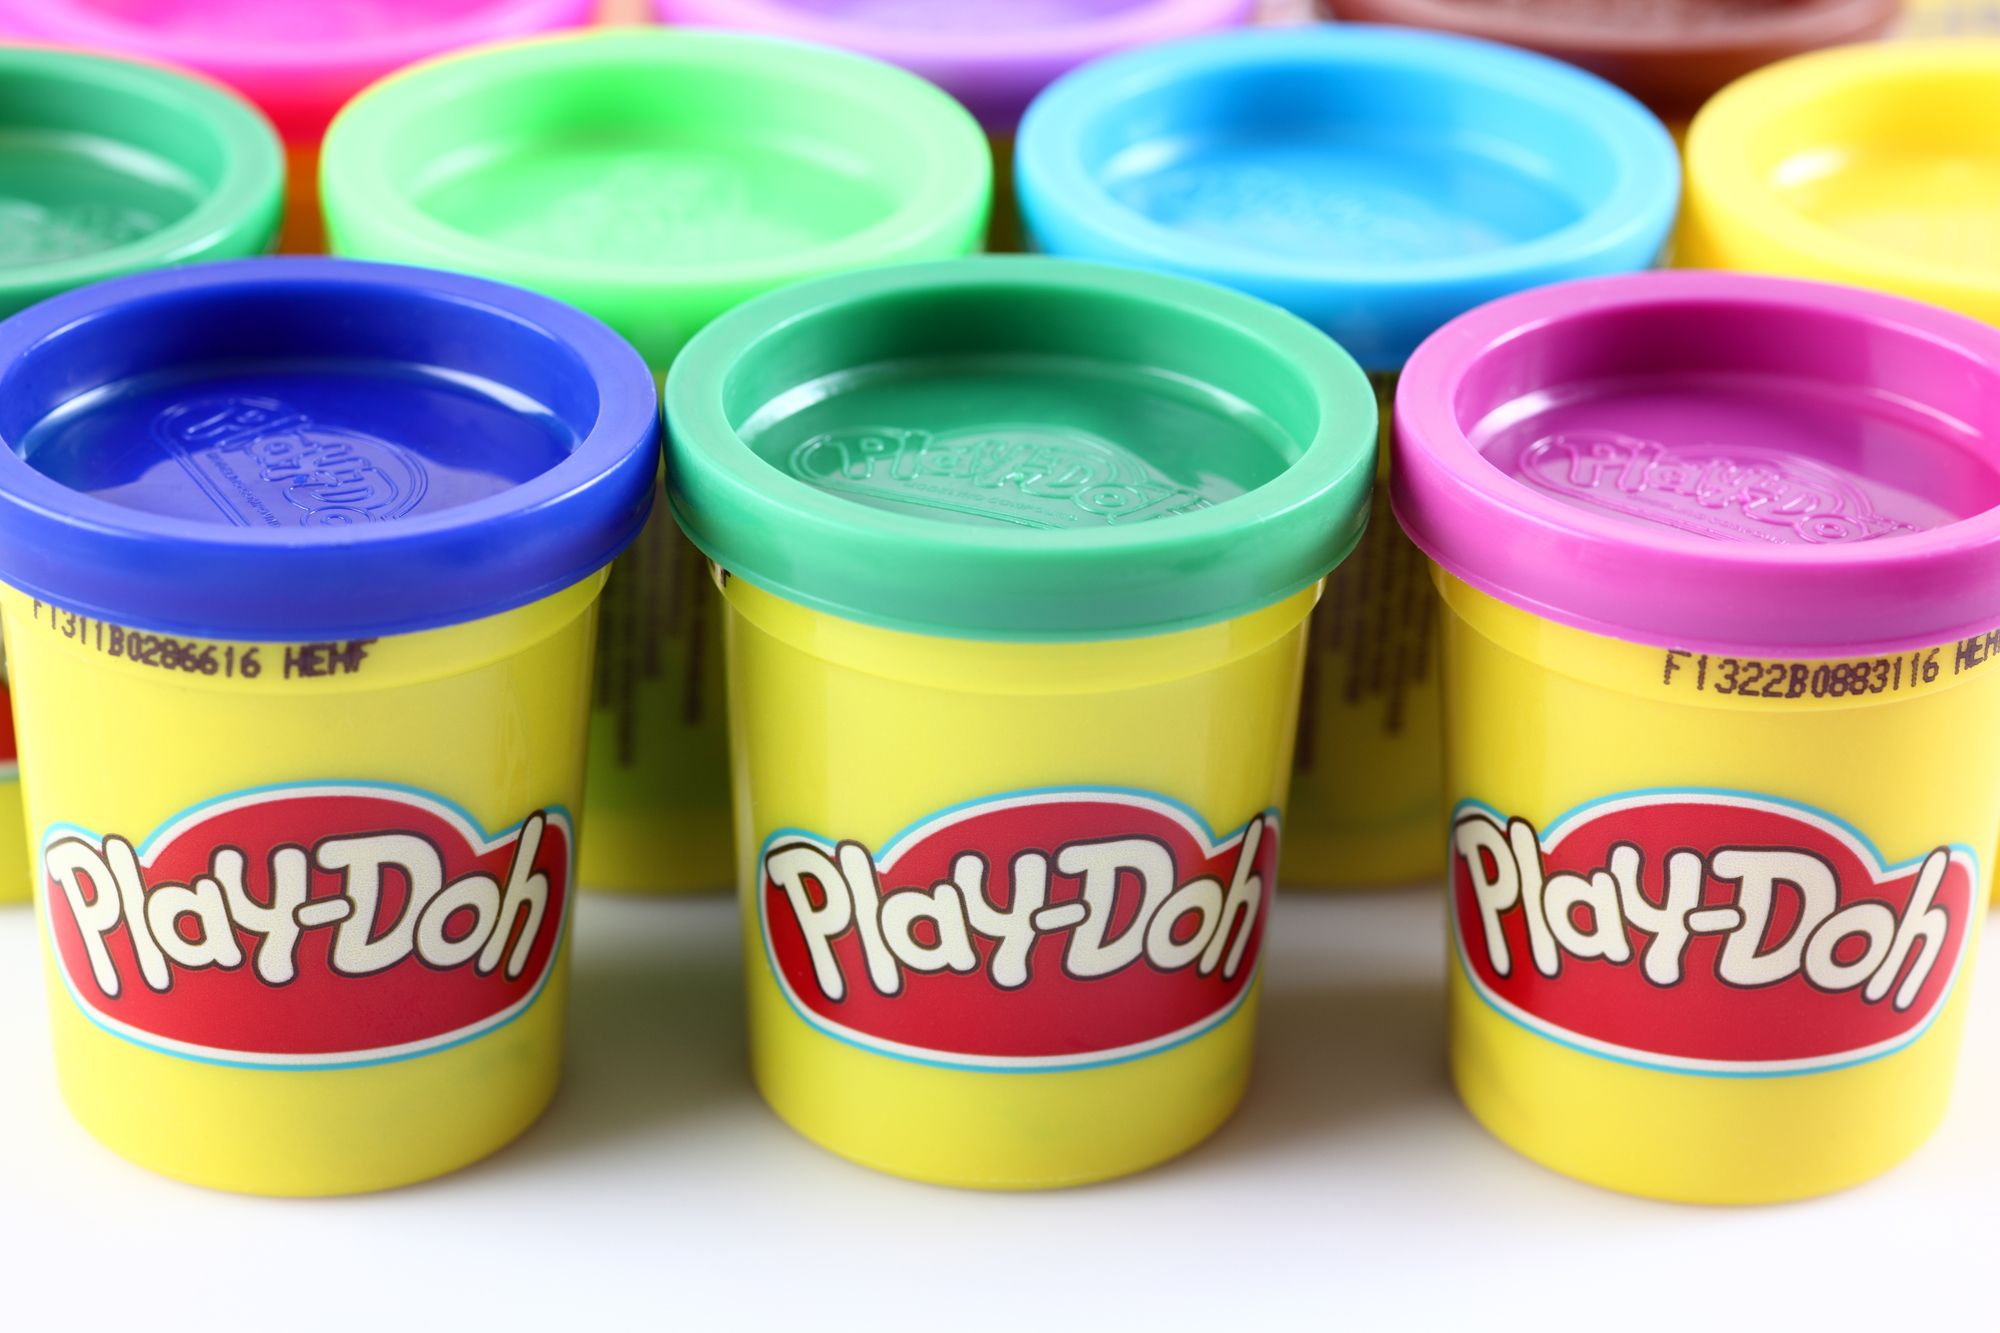 Play-Doh Town Set Painter Hasbro Playdoh for sale online